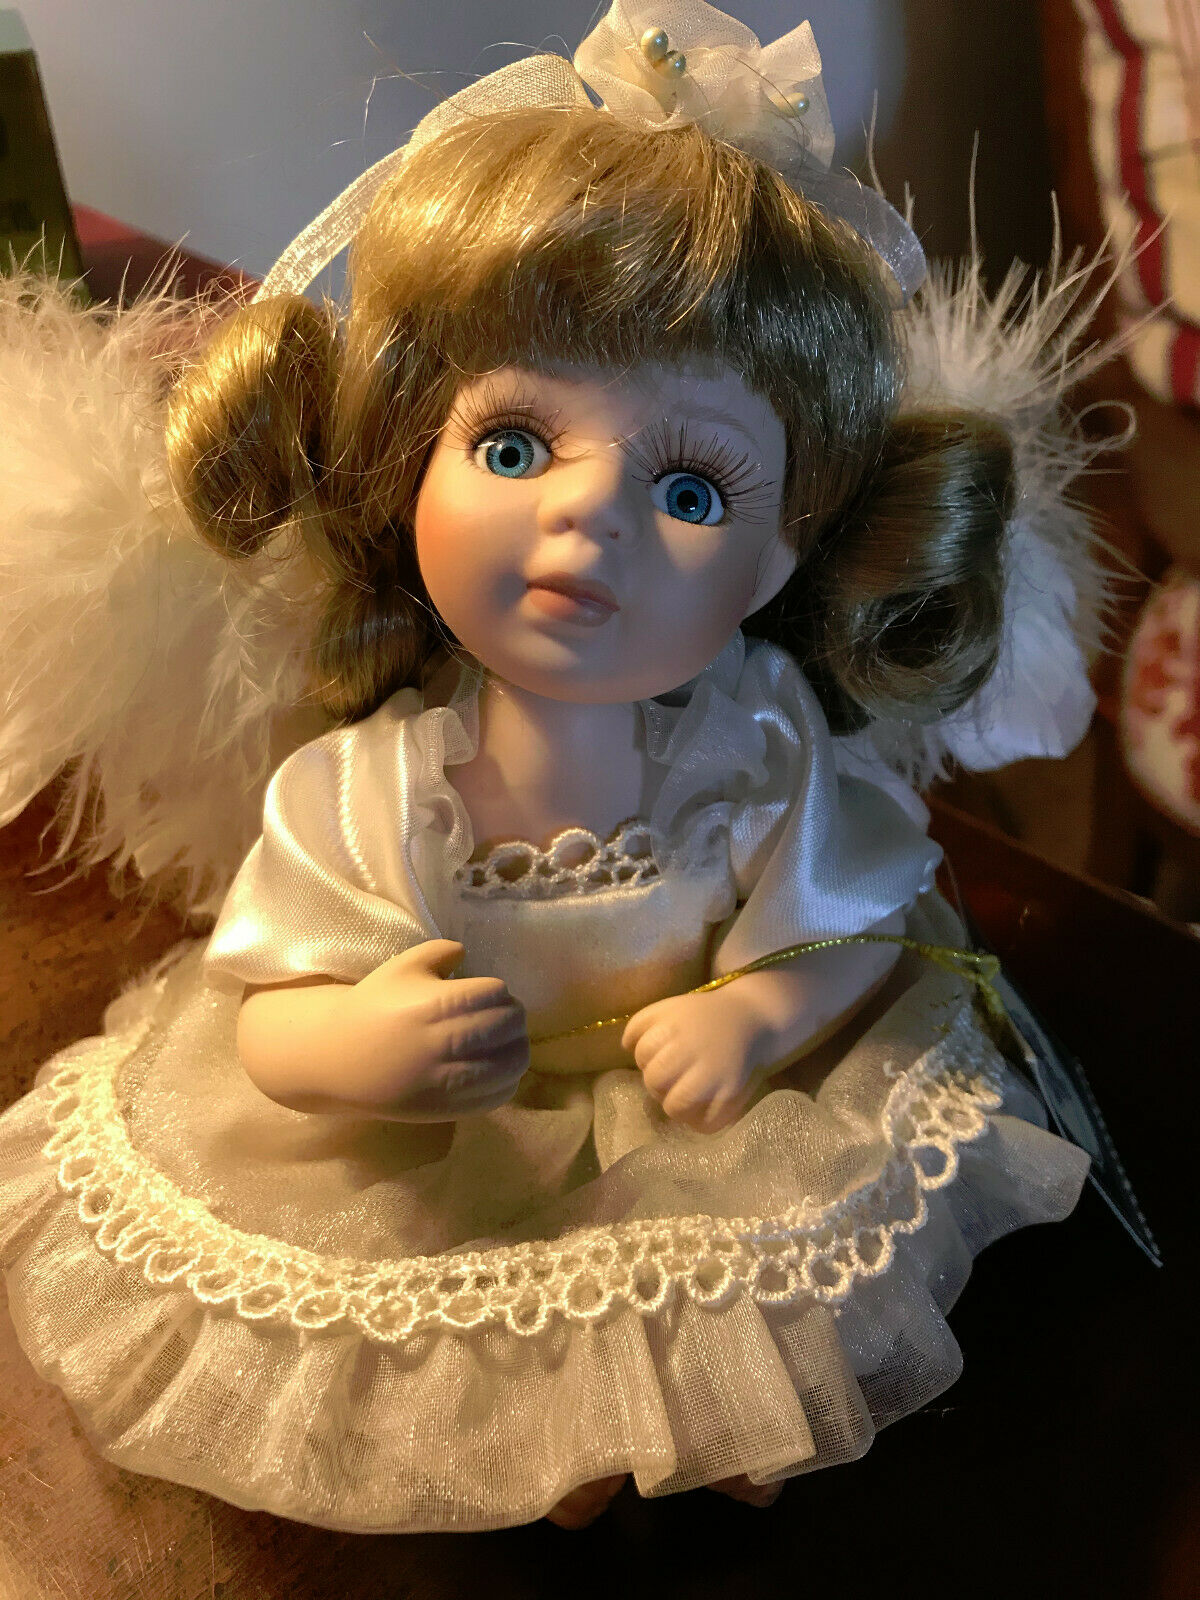 Geppeddo Angel Porcelain Doll With Wings Blonde Hair 08b263 No Box 6 Inches